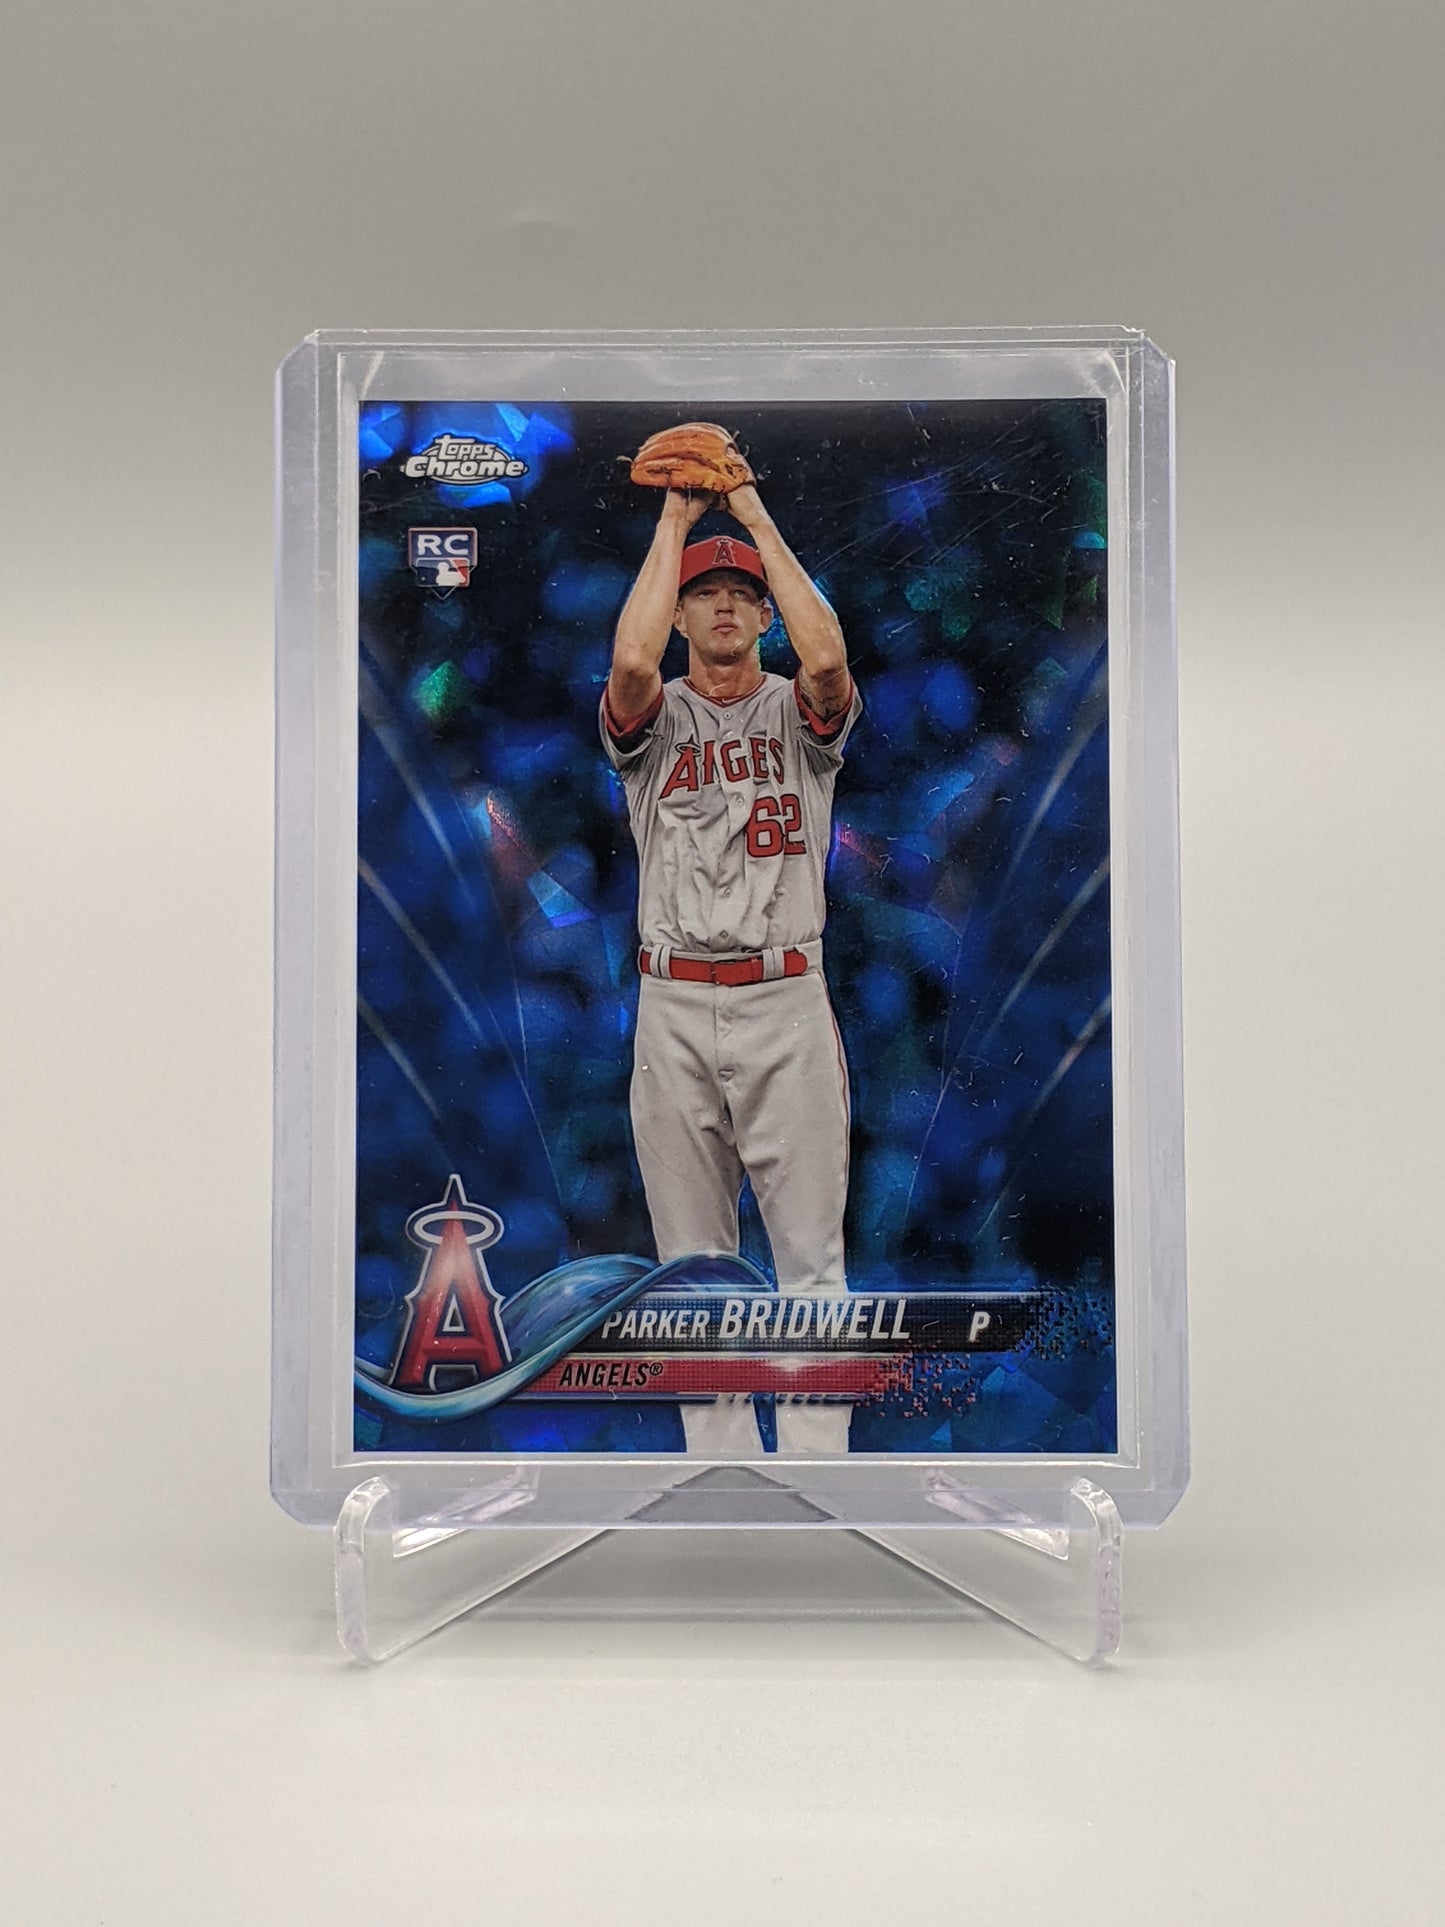 2018 Topps Chrome Sapphire #322 Parker Bridwell RC Angels